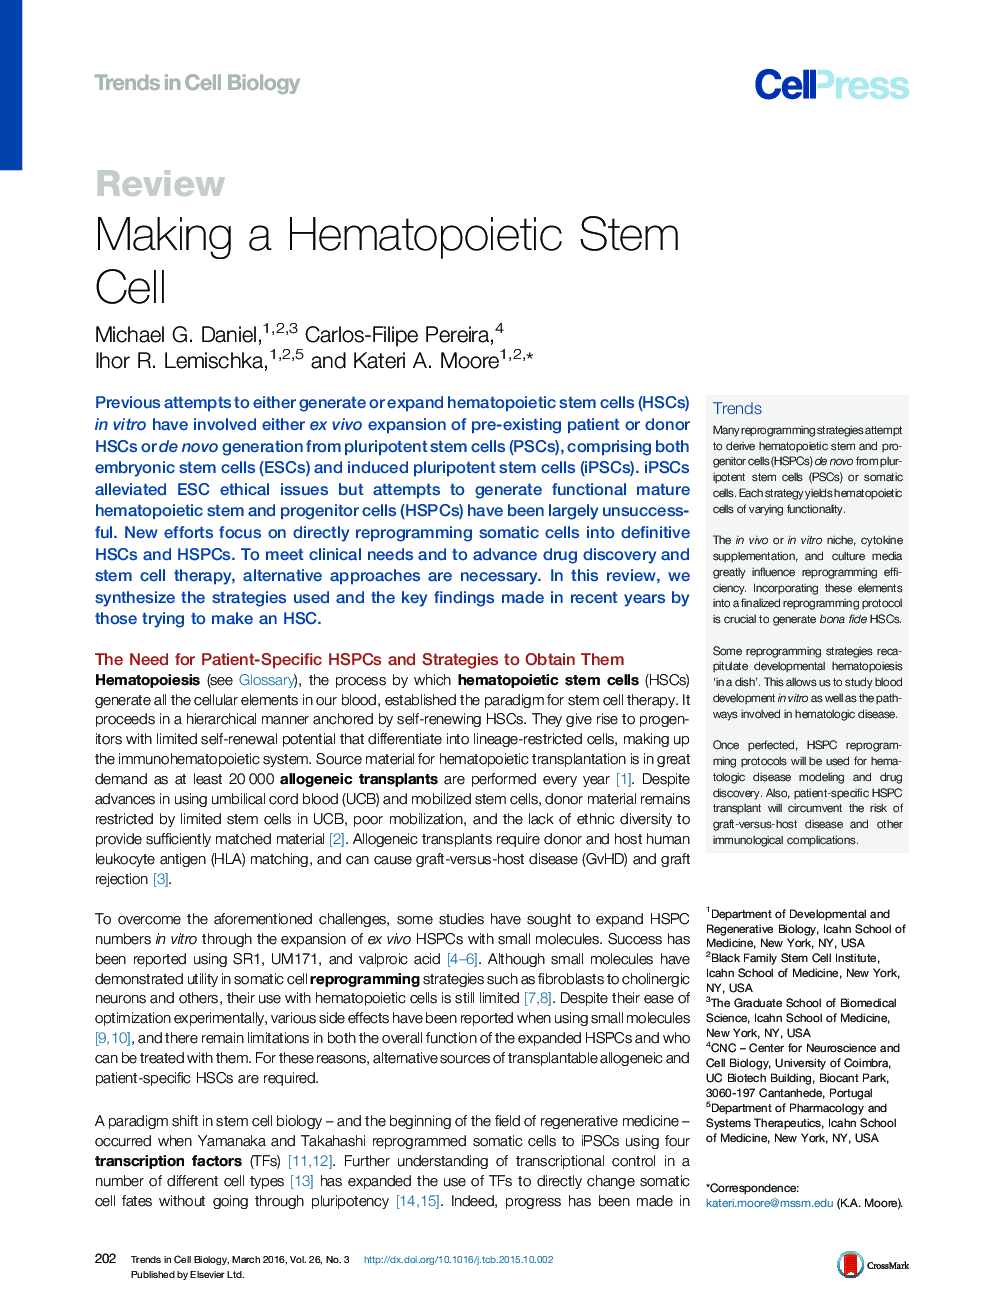 Making a Hematopoietic Stem Cell